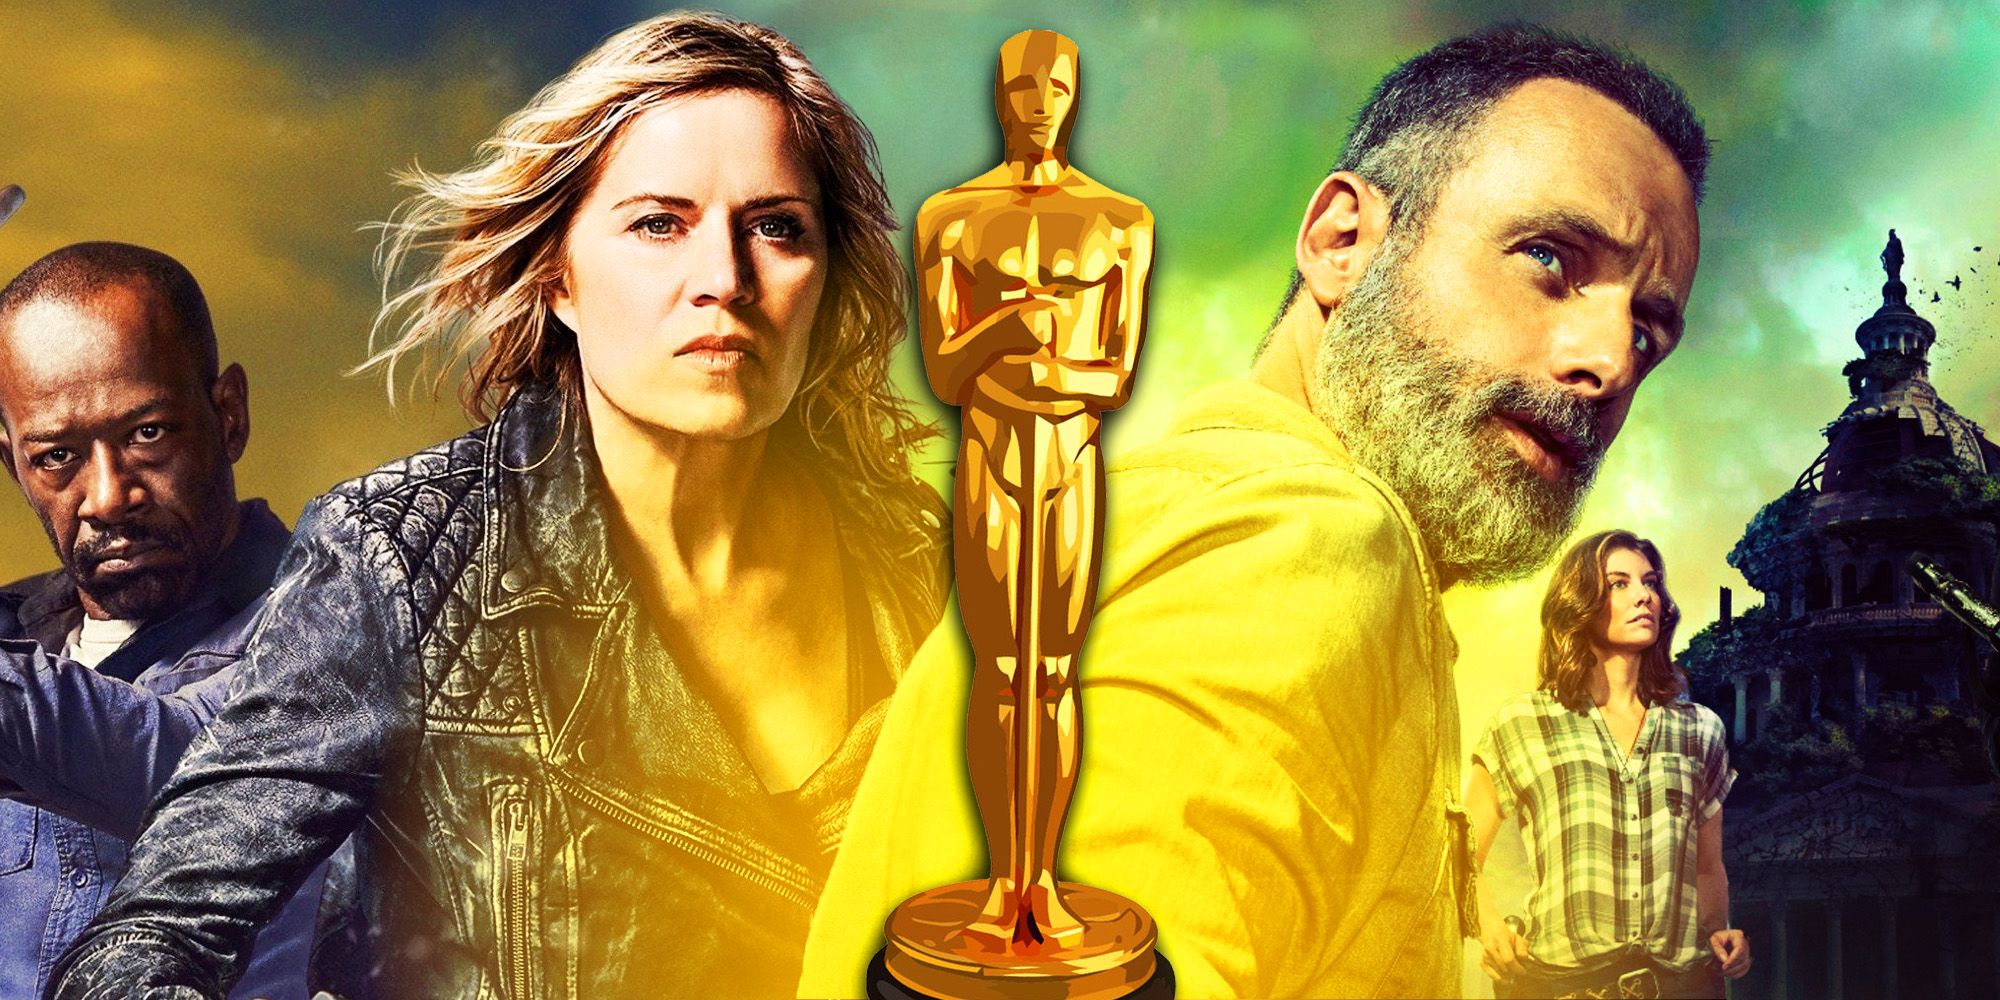 Oscar award and imagery from The Walking Dead and Fear of the Walking Dead